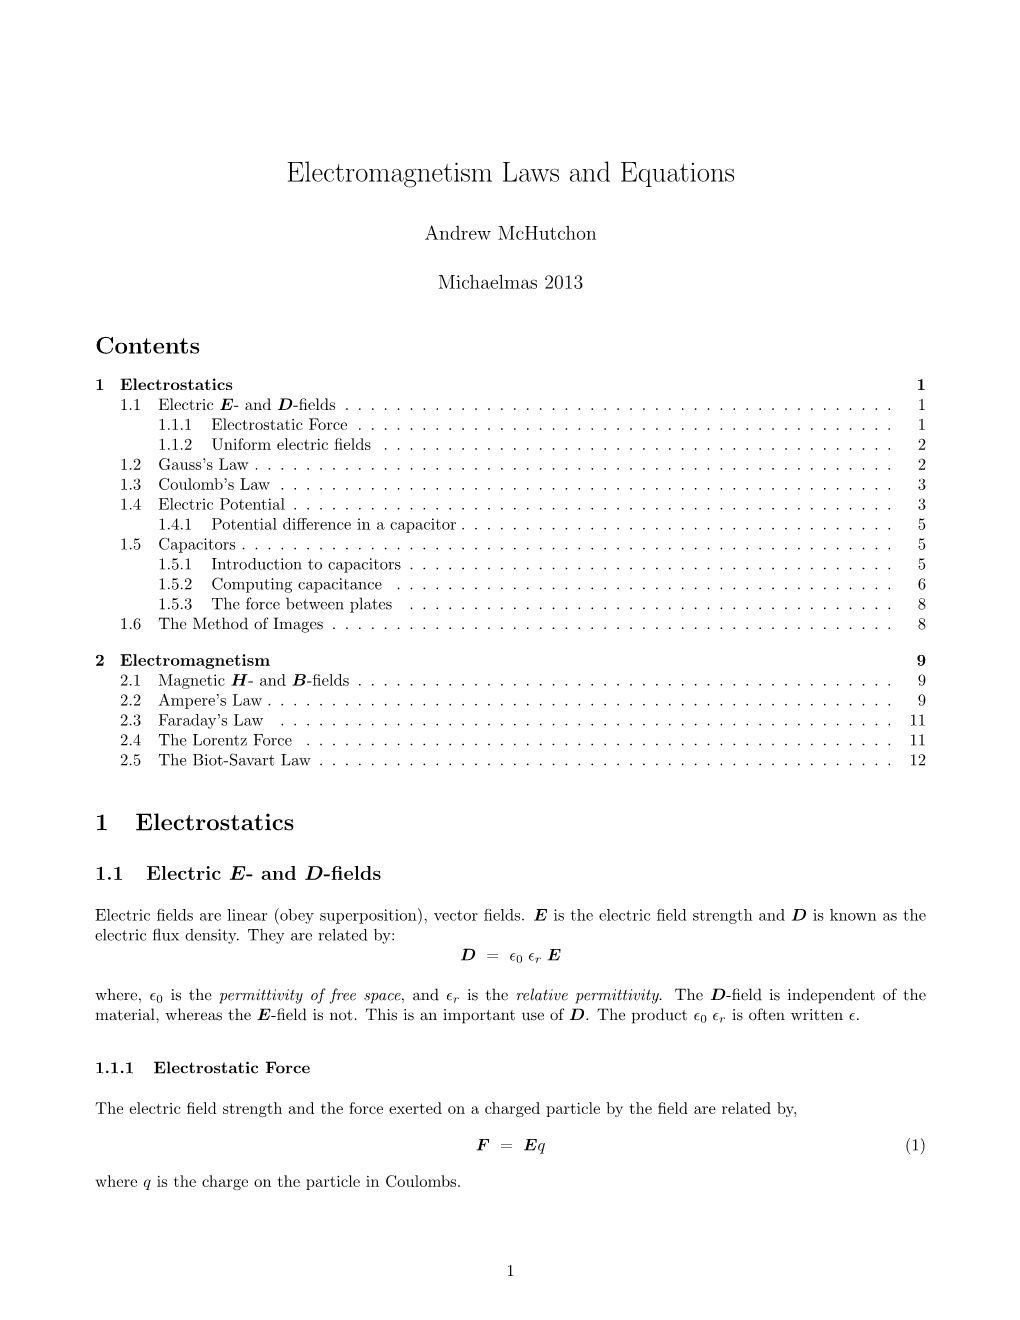 Electromagnetism Laws and Equations